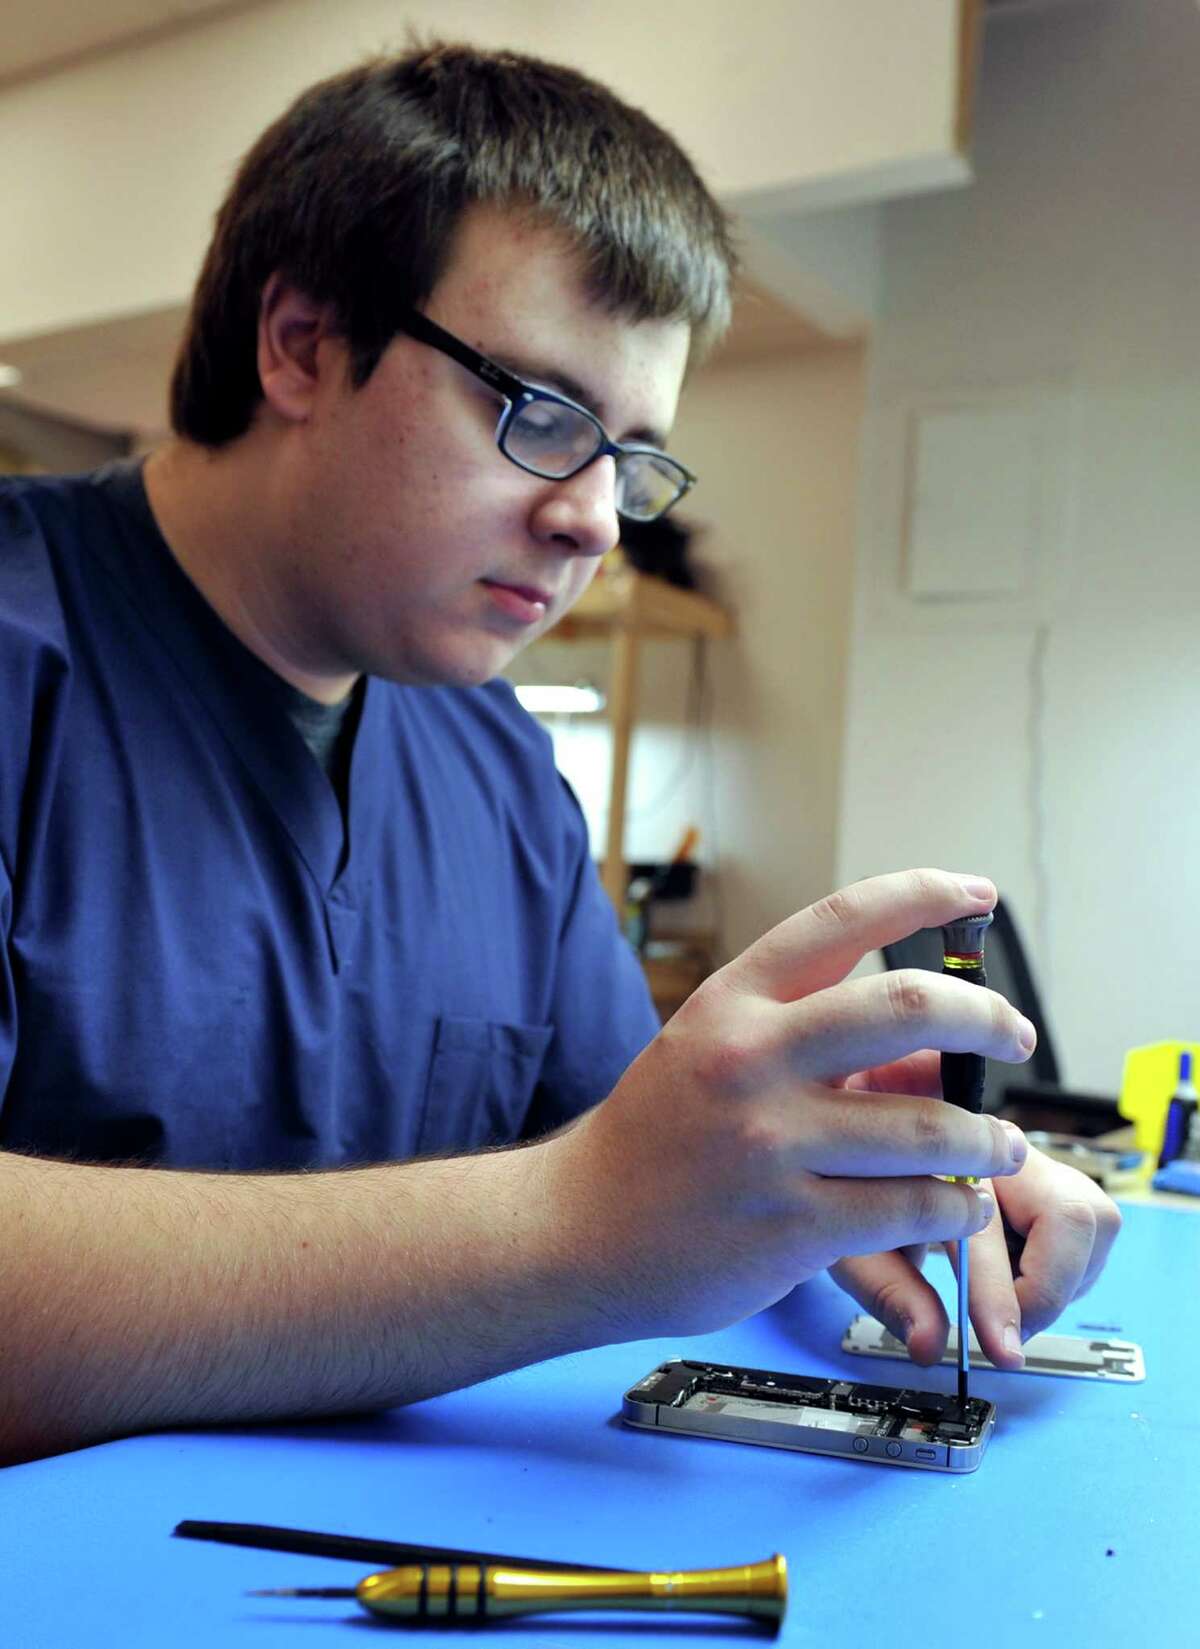 Aron Kowalski, 18, of New Milford, Conn. disassembles an iPhone at the Phone Surgeon on Federal Road in Danbury, Conn. Monday, June 16, 2014.